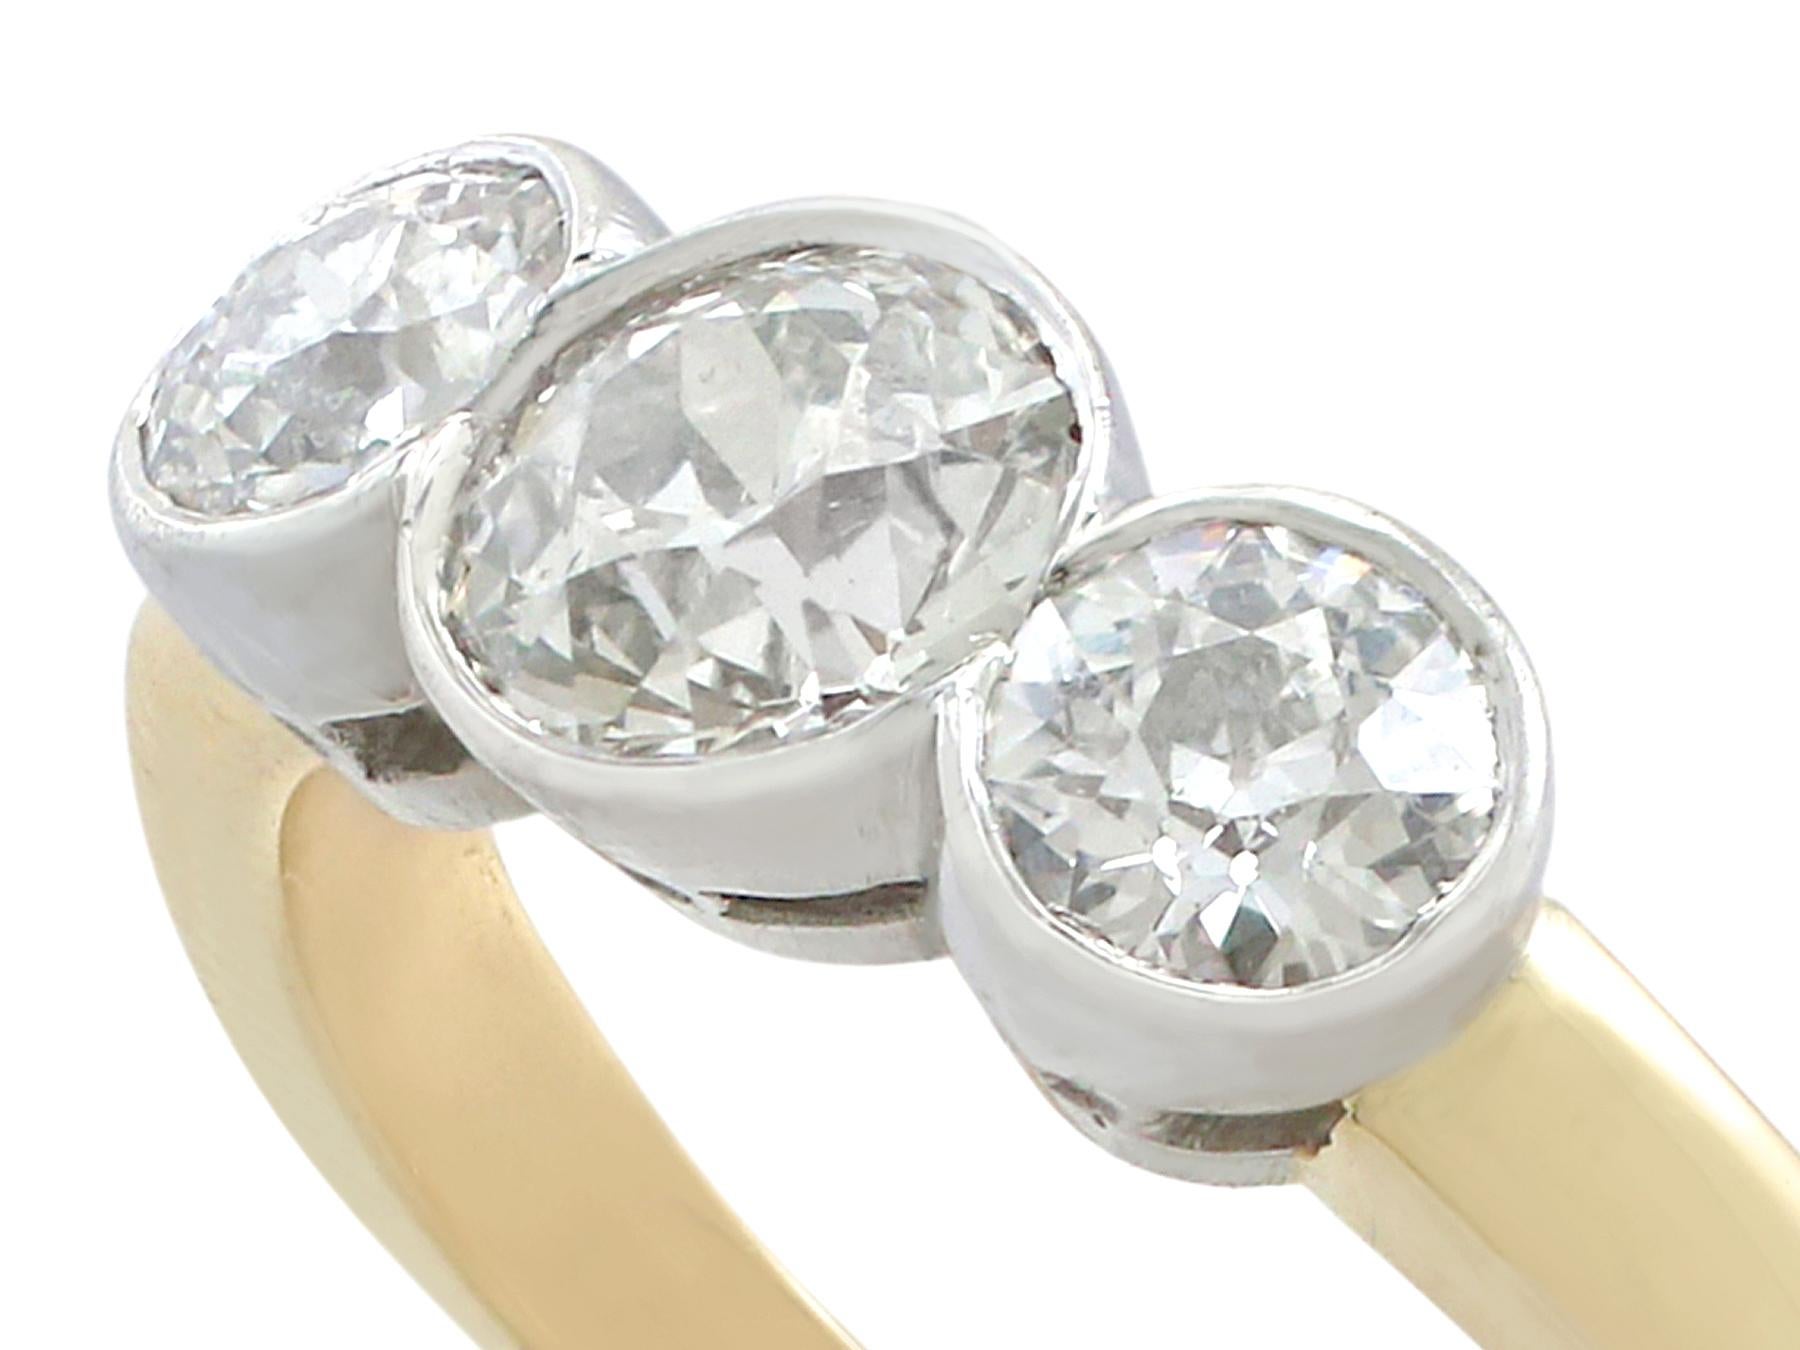 An impressive antique 1.69 Ct diamond and contemporary 18k yellow gold, 18k white gold set trilogy ring; part of our diverse antique jewelry collections.

This fine and impressive collet set diamond trilogy ring has been crafted in 18k yellow gold